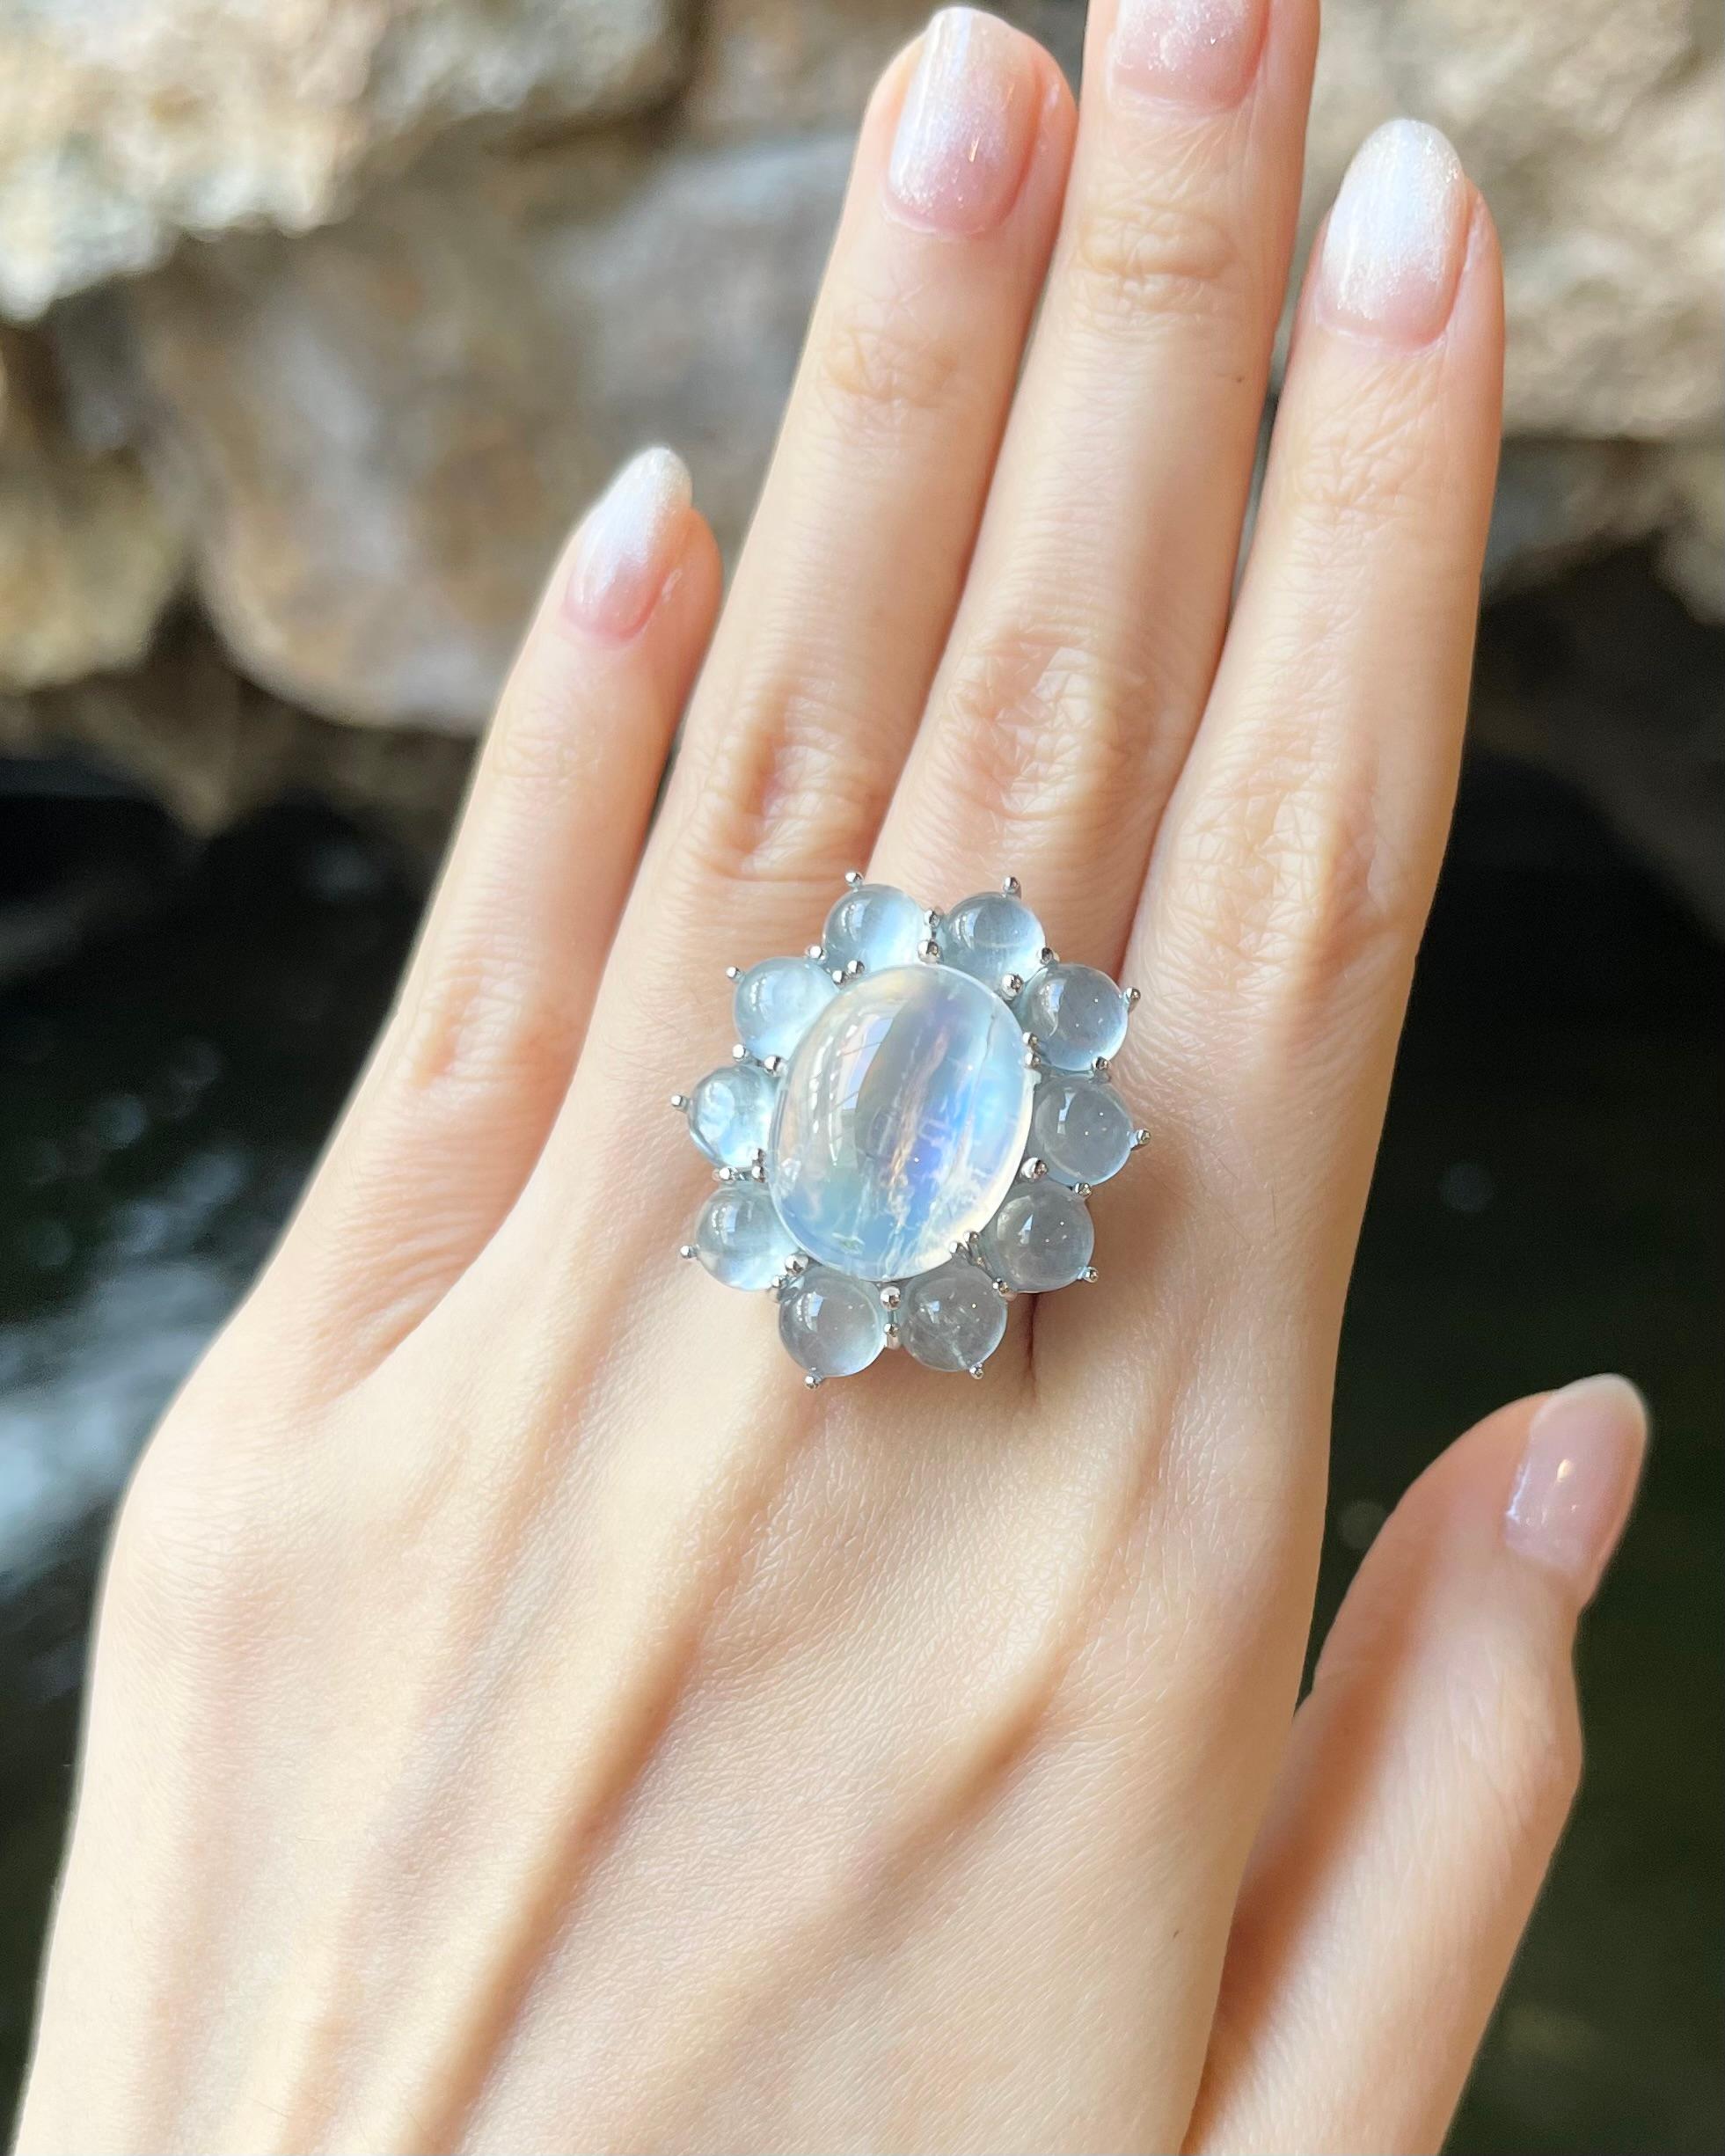 Moonstone 14.98 carats with Cabochon Aquamarine 8.91 carats Ring set in 14K White Gold Settings

Width:  2.5 cm 
Length: 2.9 cm
Ring Size: 56
Total Weight: 17.5 grams

